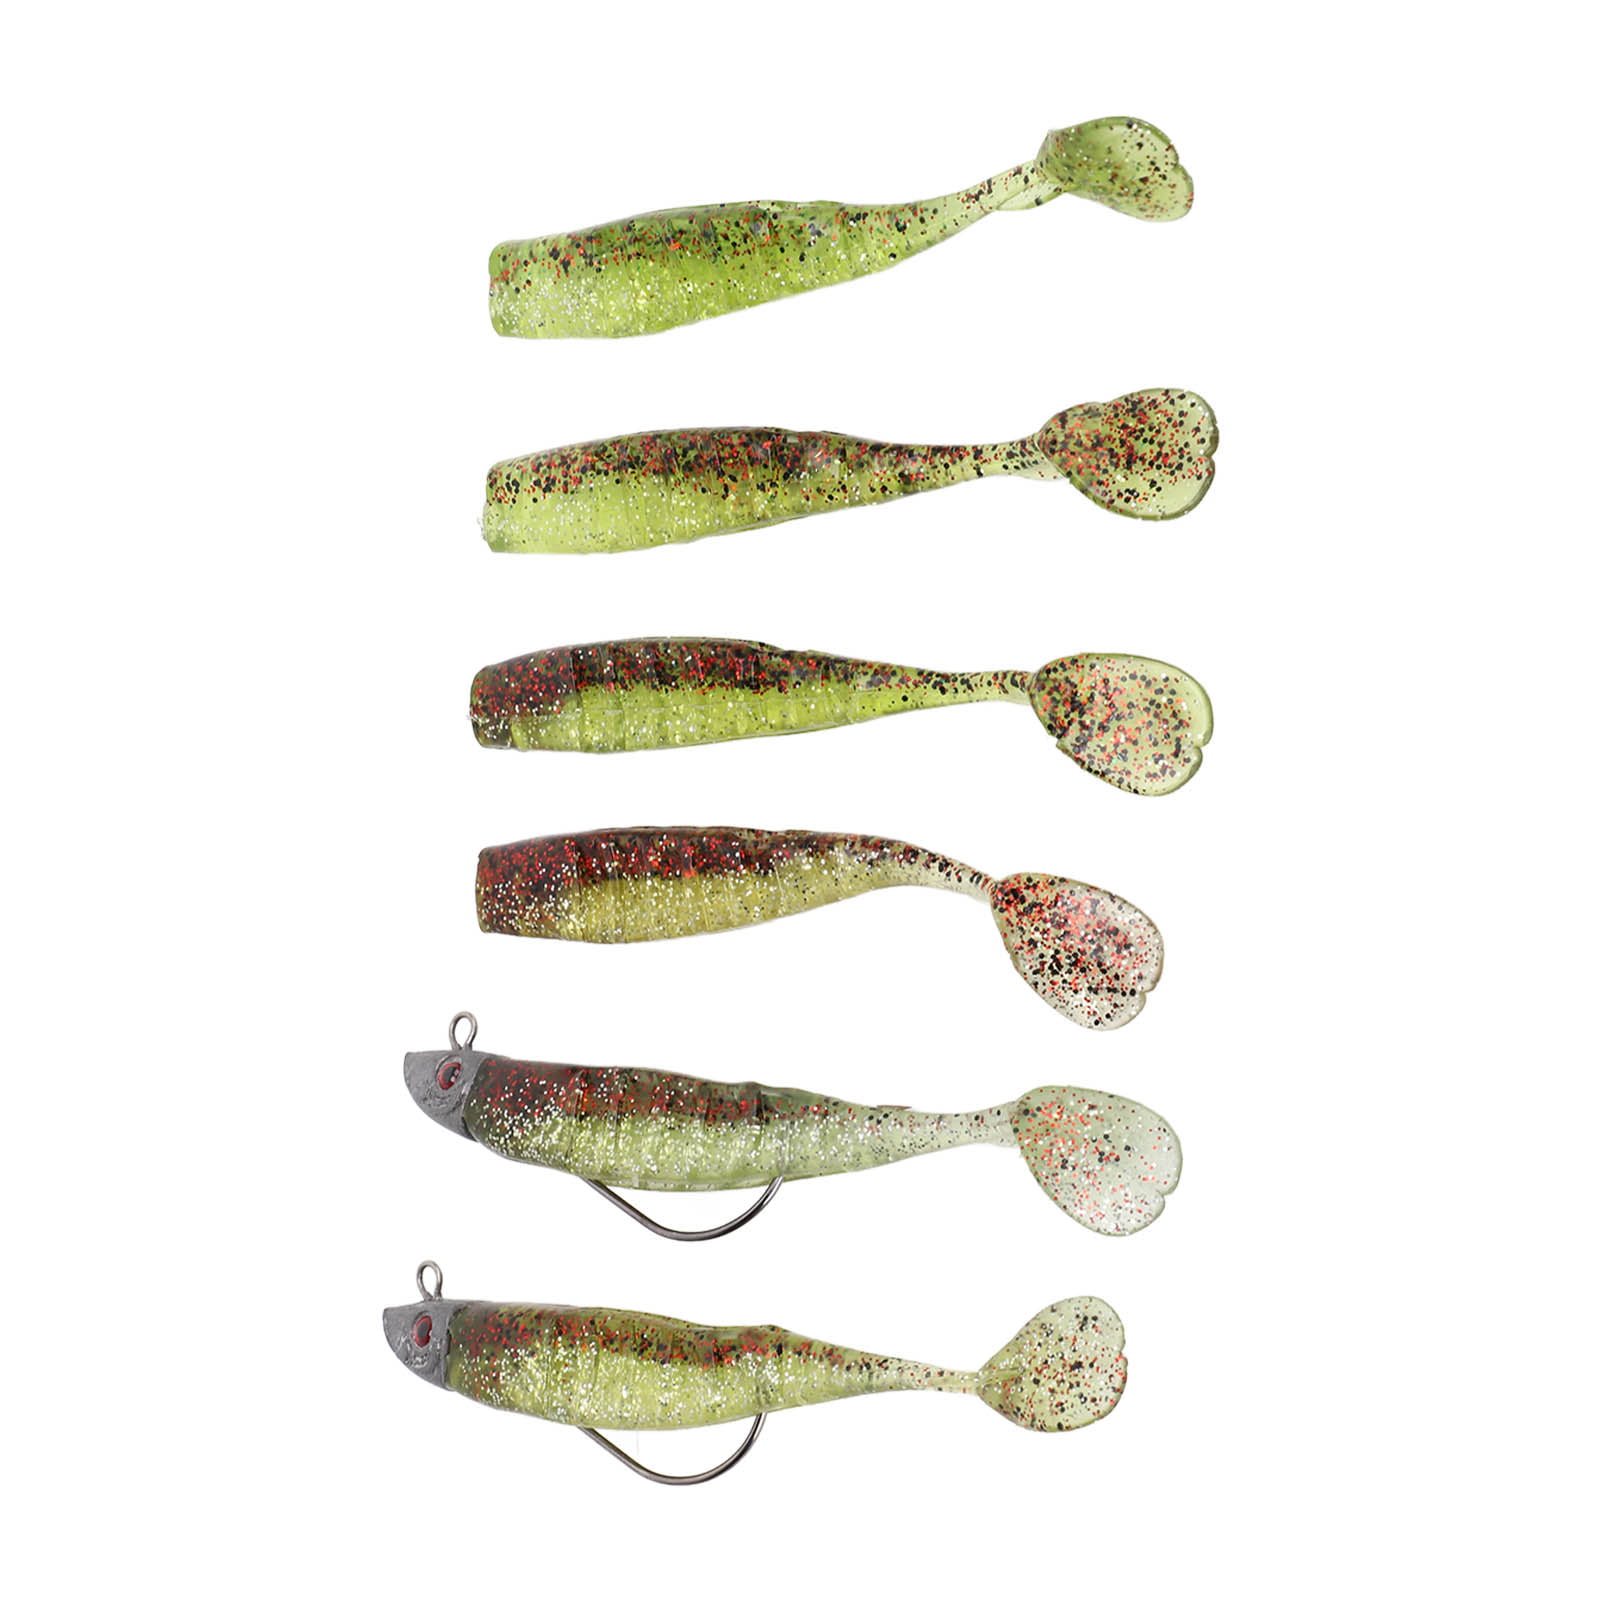 Details about   New Design Body Fishing Soft Lure Kit Glossy Artificial Bait Appâts artificiels